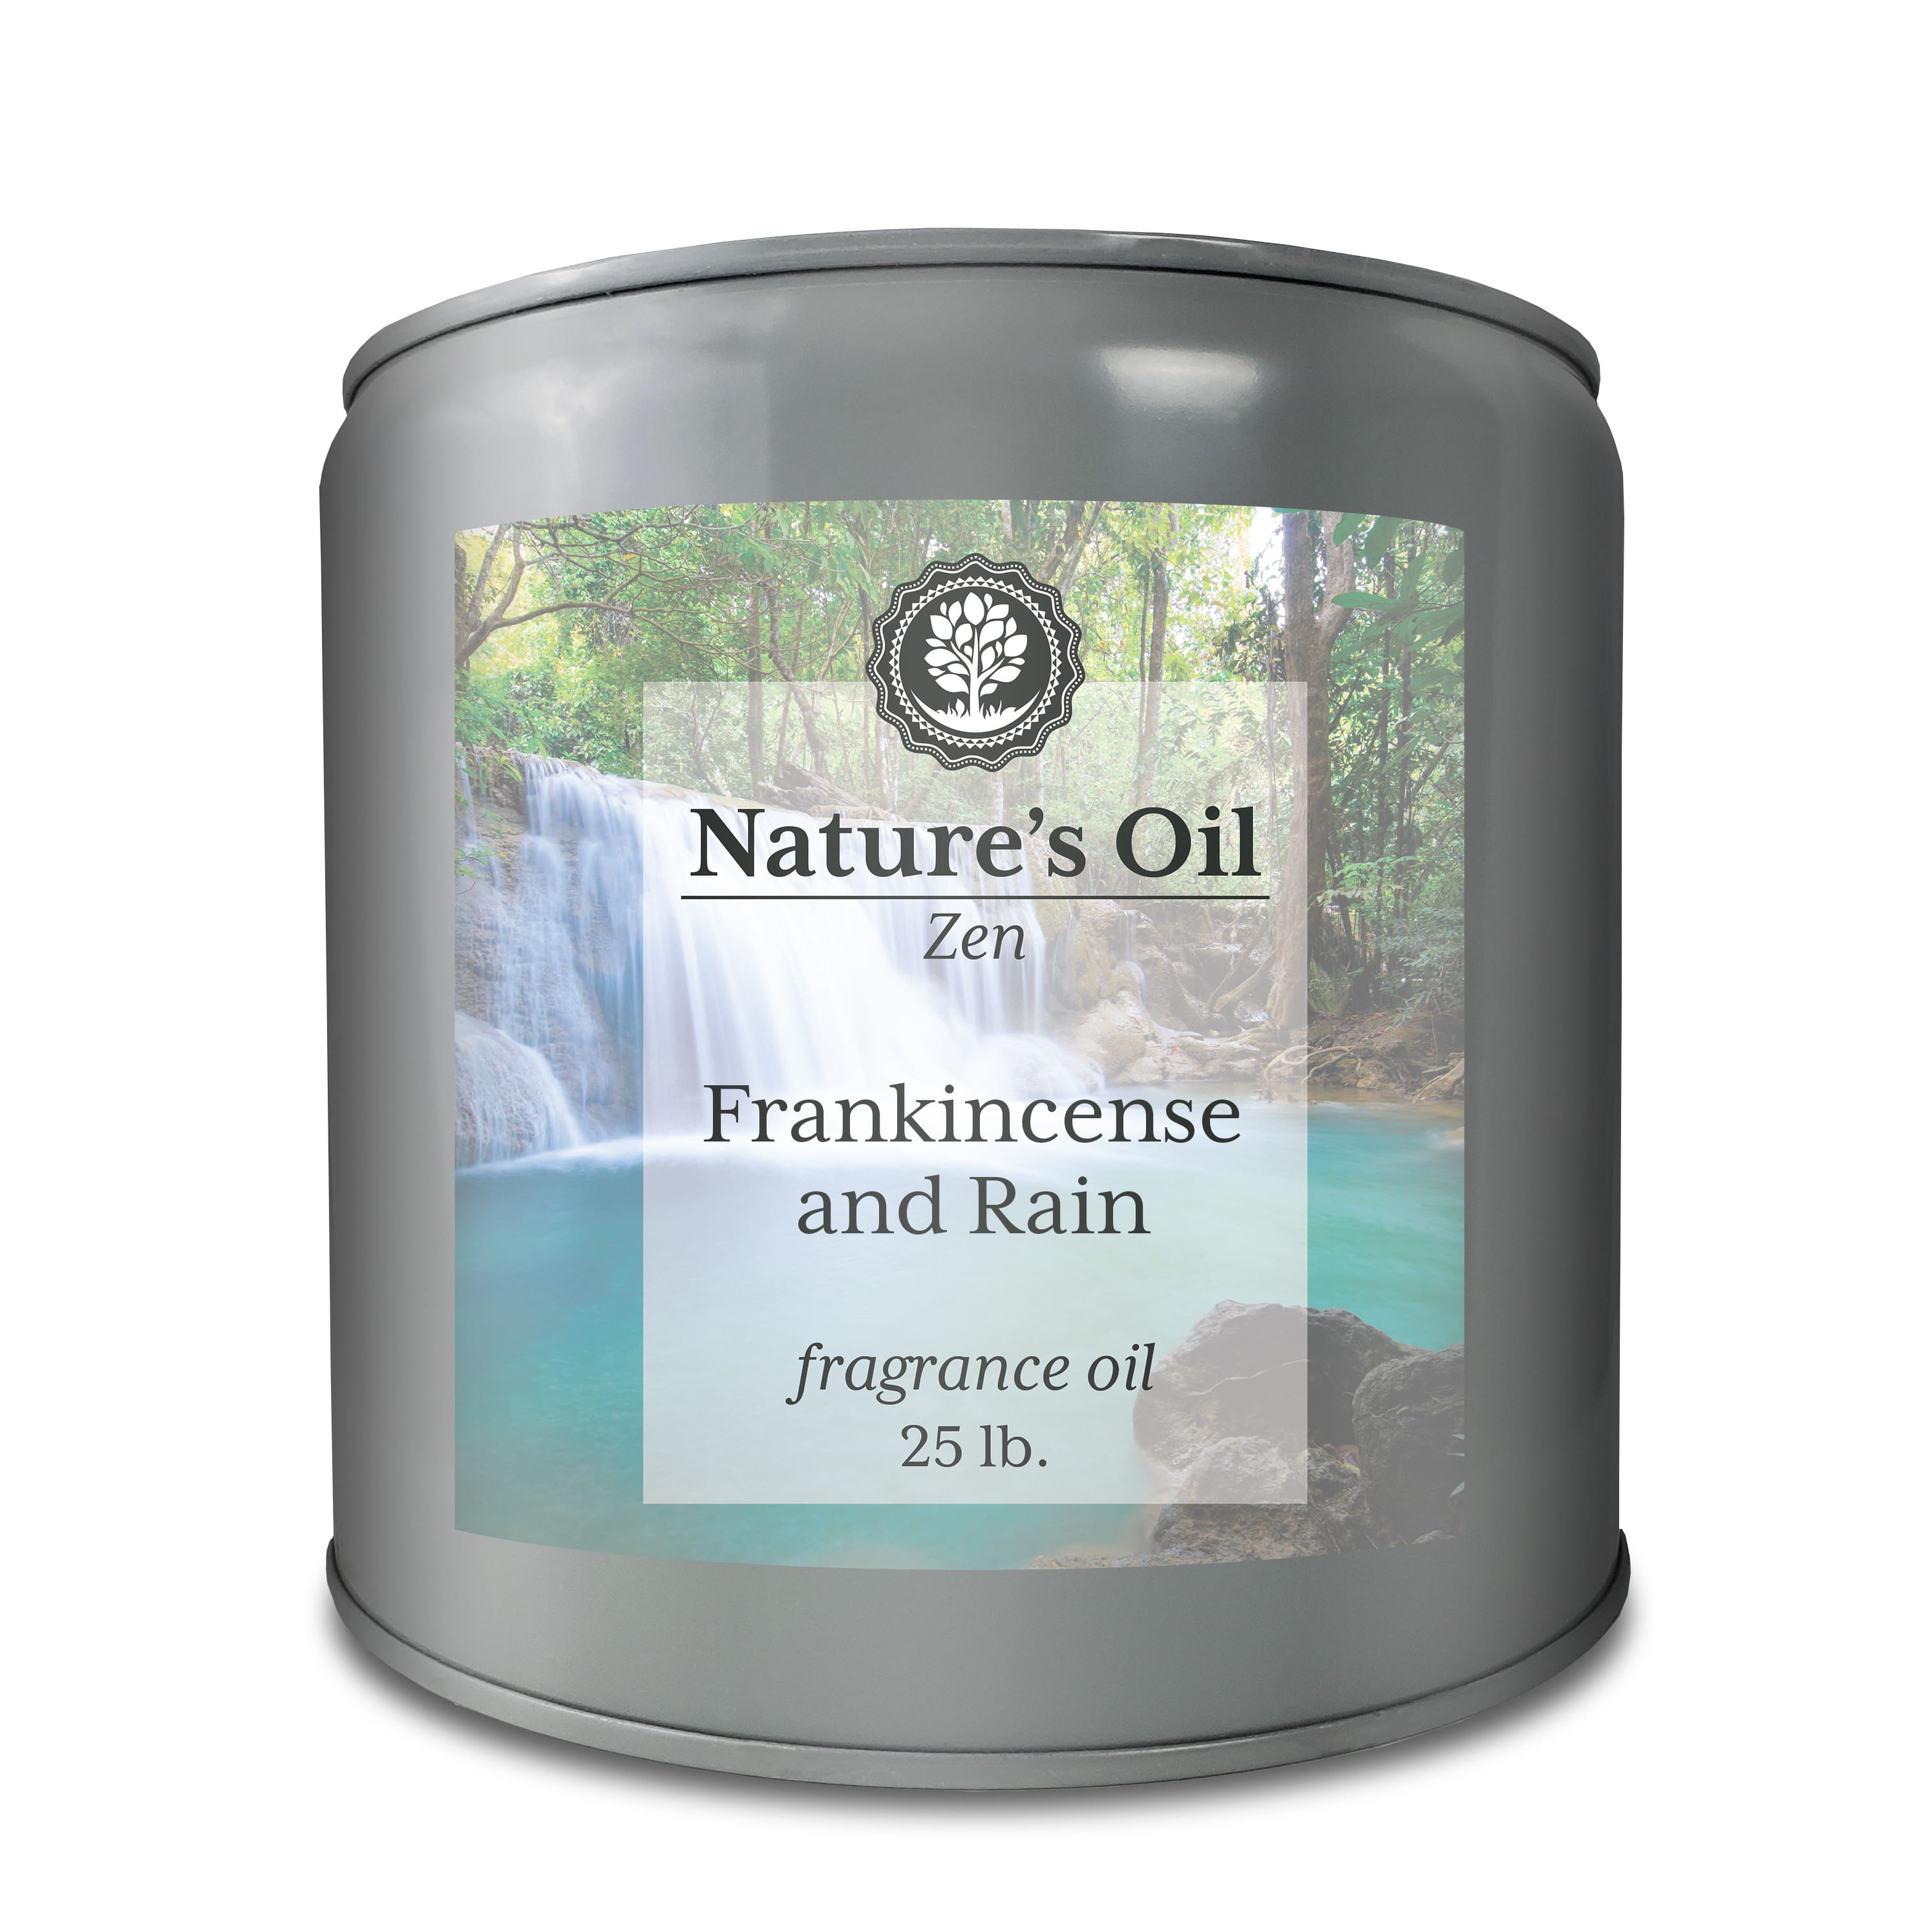 Frankincense and Rain Fragrance Oil (60ml) for Diffusers, Soap